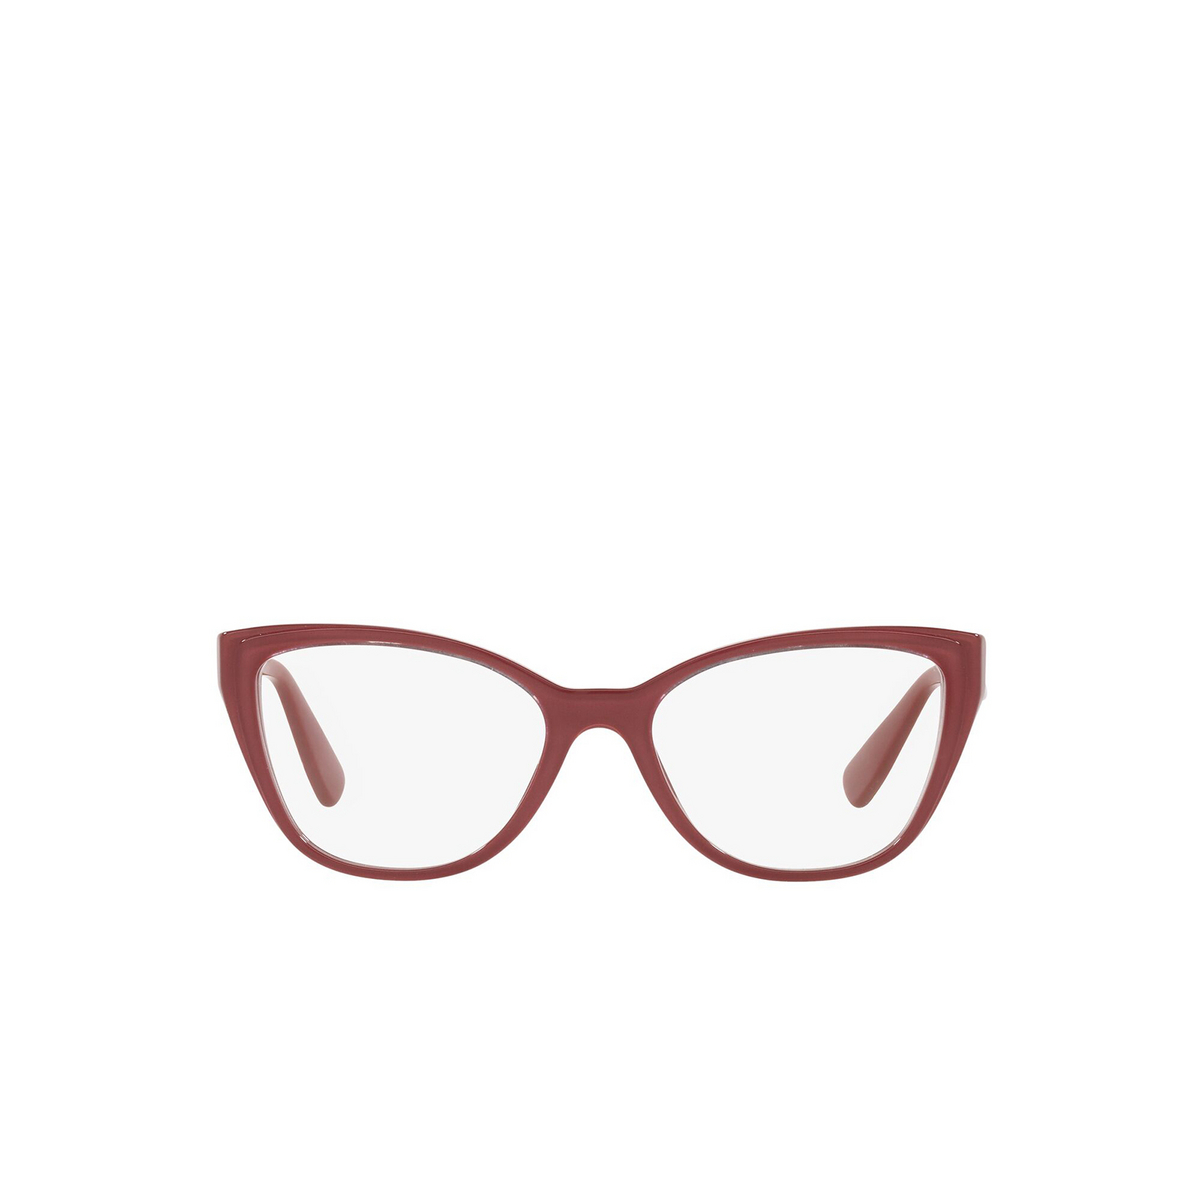 Miu Miu® Cat-eye Eyeglasses: Core Collection MU 04SV color Red 05F1O1 - front view.